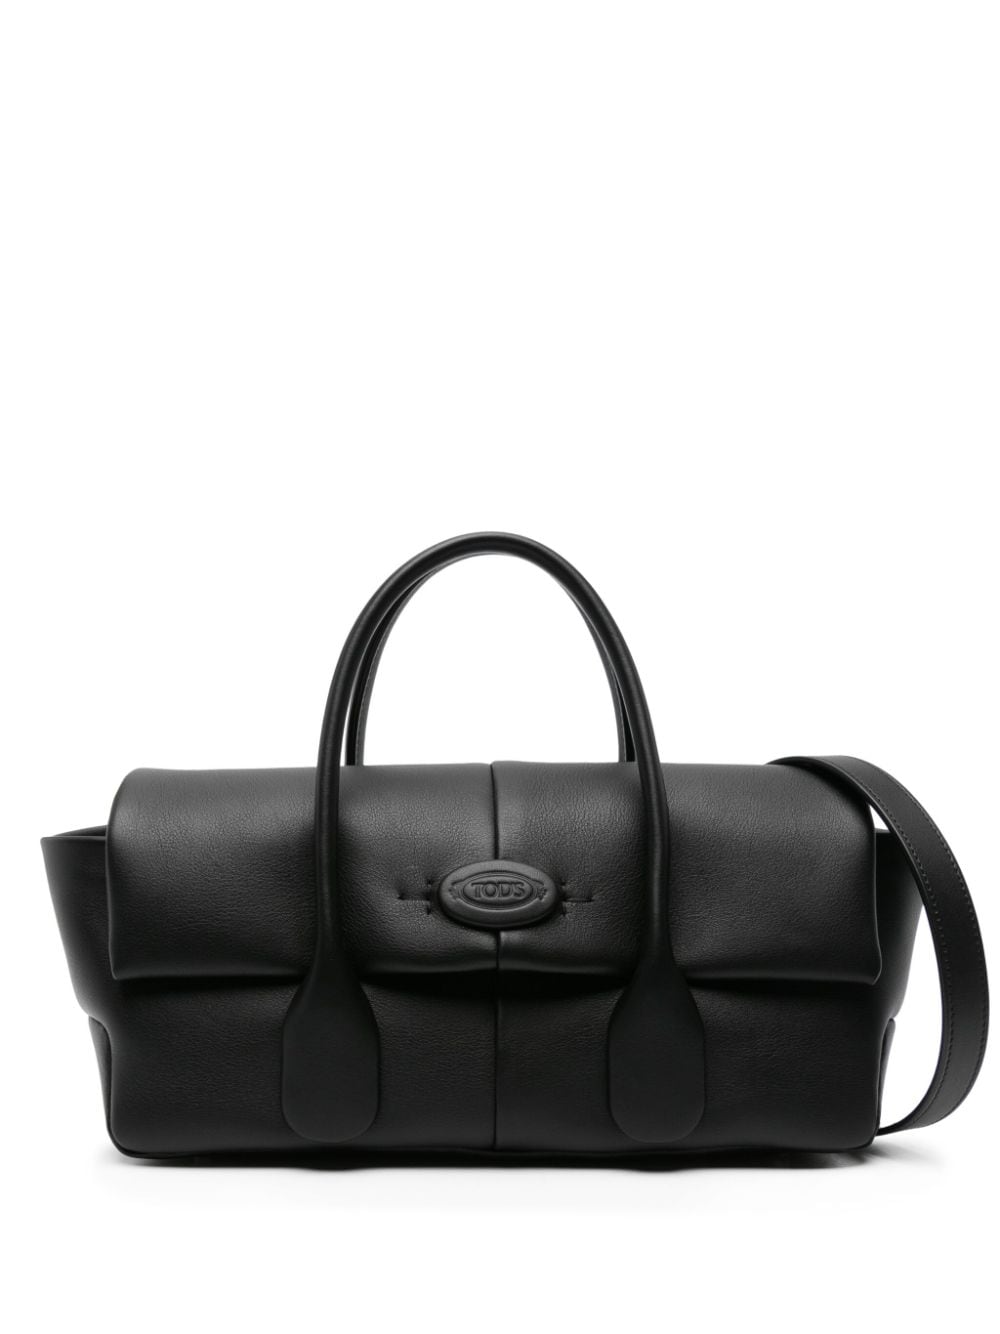 TOD'S Black Leather Logo Oval Patch Handbag for Women